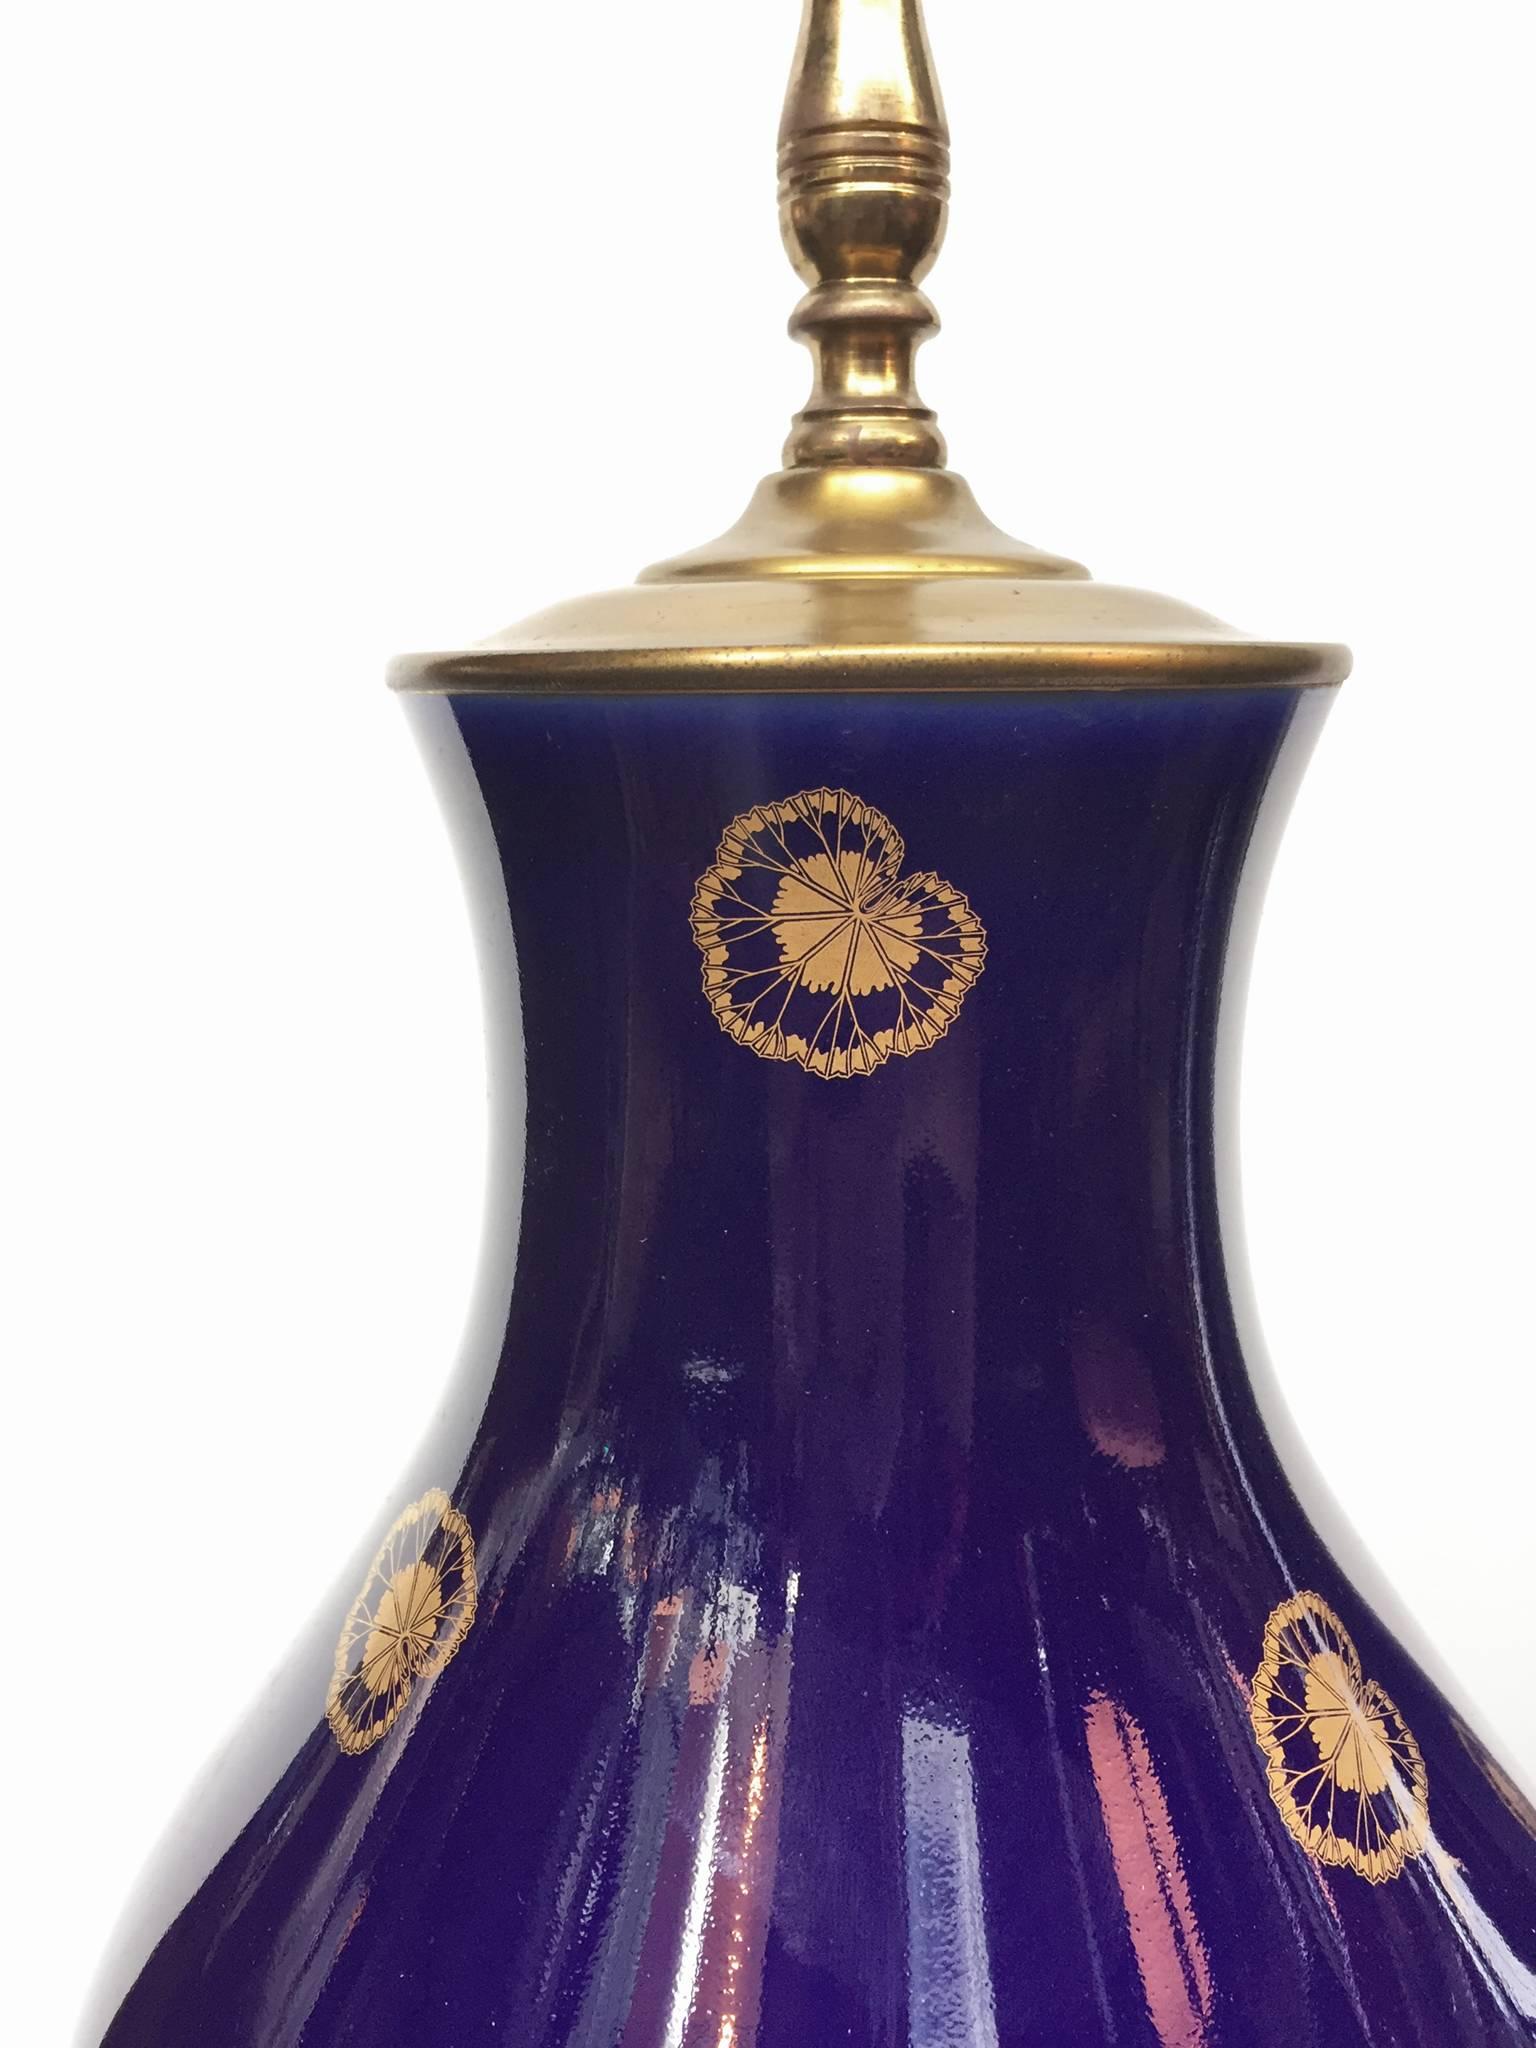 Brass 20th Century Pair of Cobalt Blue Porcelain Table Lamps Attributed to Sèvres